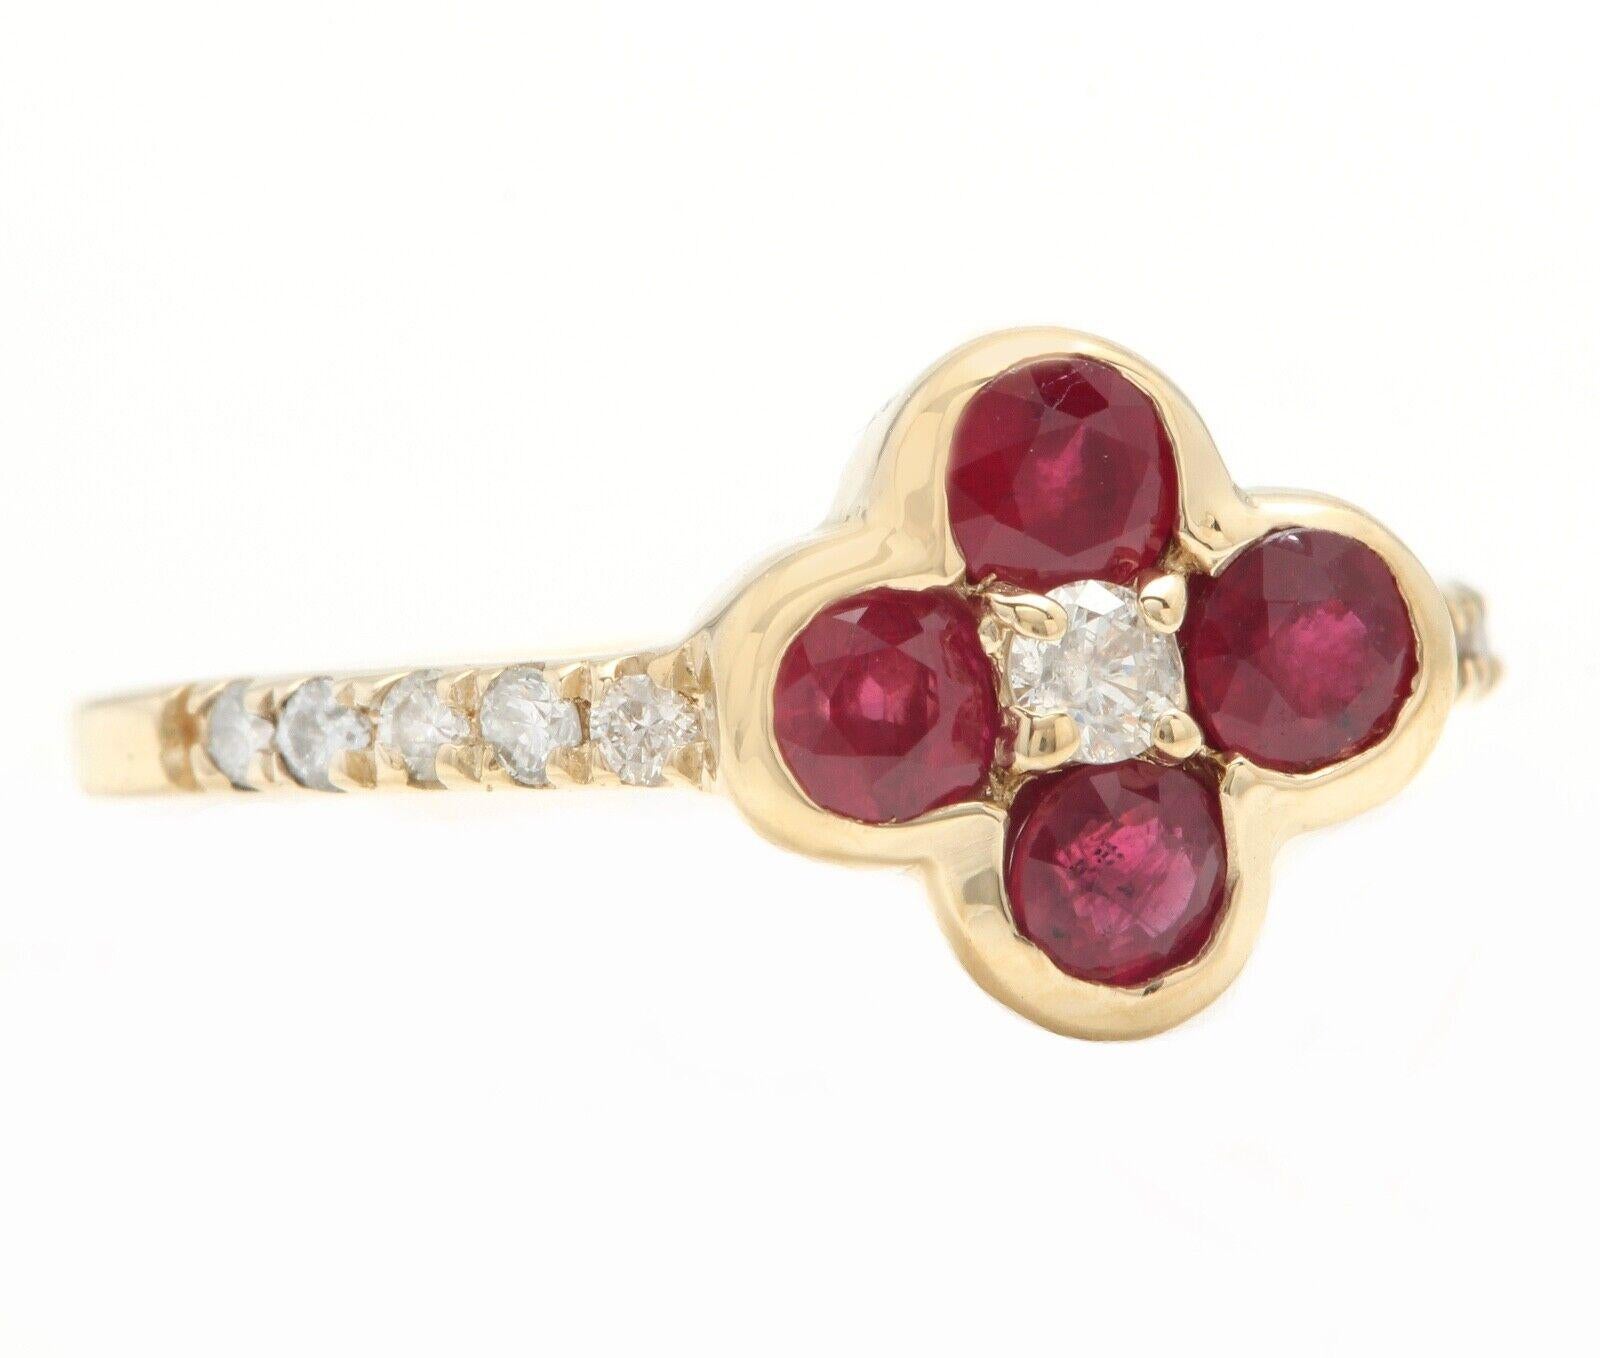 1.10 Carats Natural Ruby and Diamond 14K Solid Yellow Gold Ring

Suggested Replacement Value: $5,000.00

Total Natural Ruby Weight is: Approx. 0.90 Carats 

Rubies Treatment: Heat

Total Natural Round Diamonds Weight: Approx. 0.20 Carats (color G-H